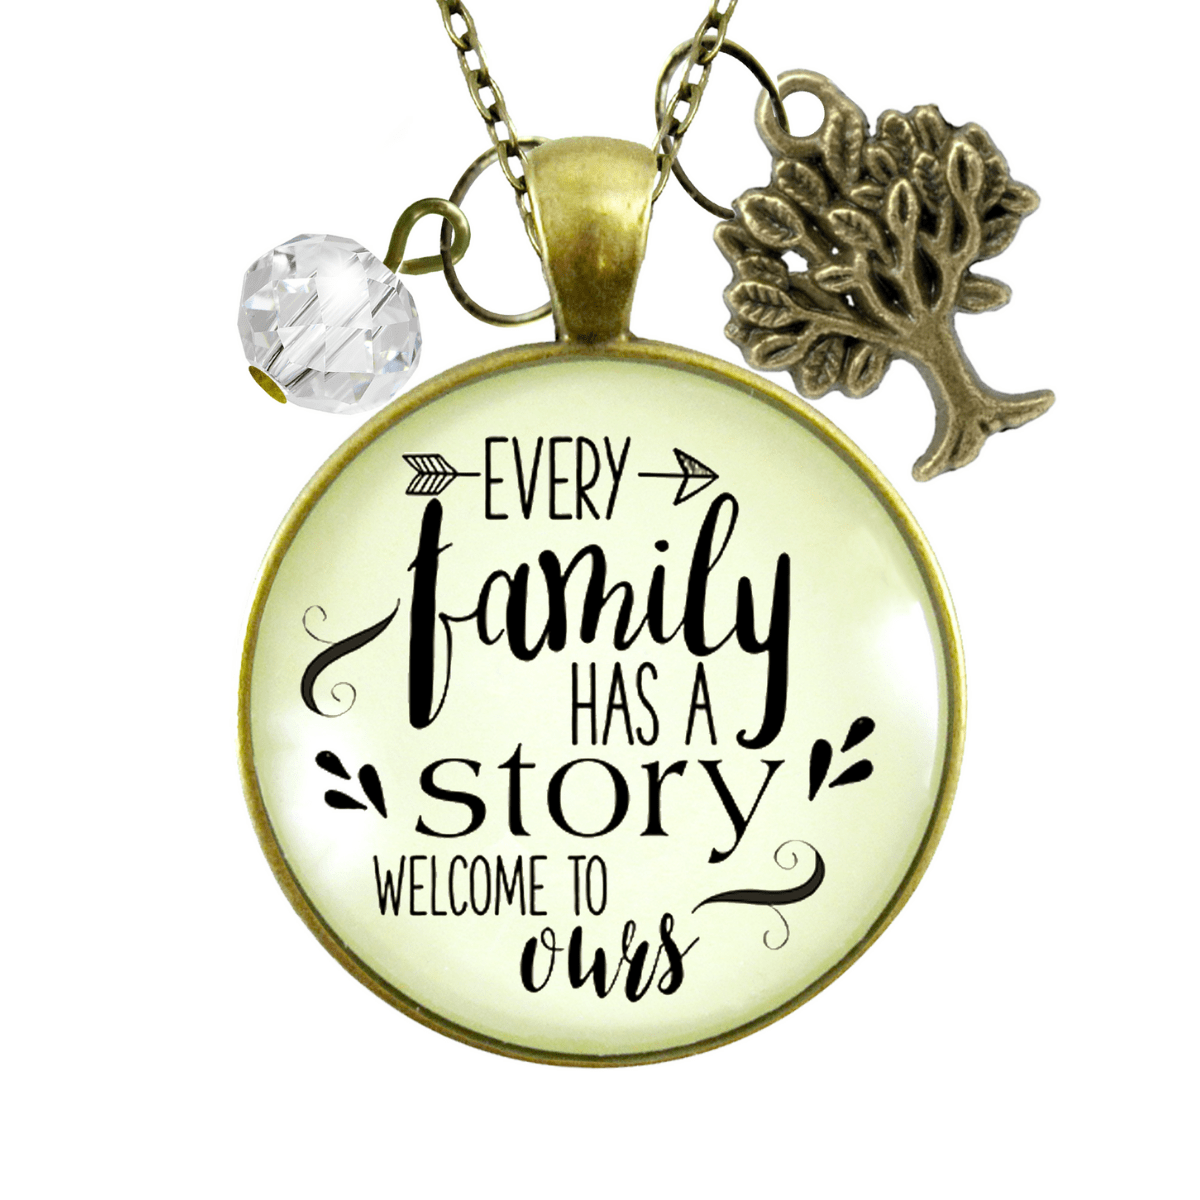 Gutsy Goodness Every Family Necklace Has A Story Welcome Gift In Law Step Bonus Child Adoption - Gutsy Goodness Handmade Jewelry;Every Family Has A Story - Gutsy Goodness Handmade Jewelry Gifts